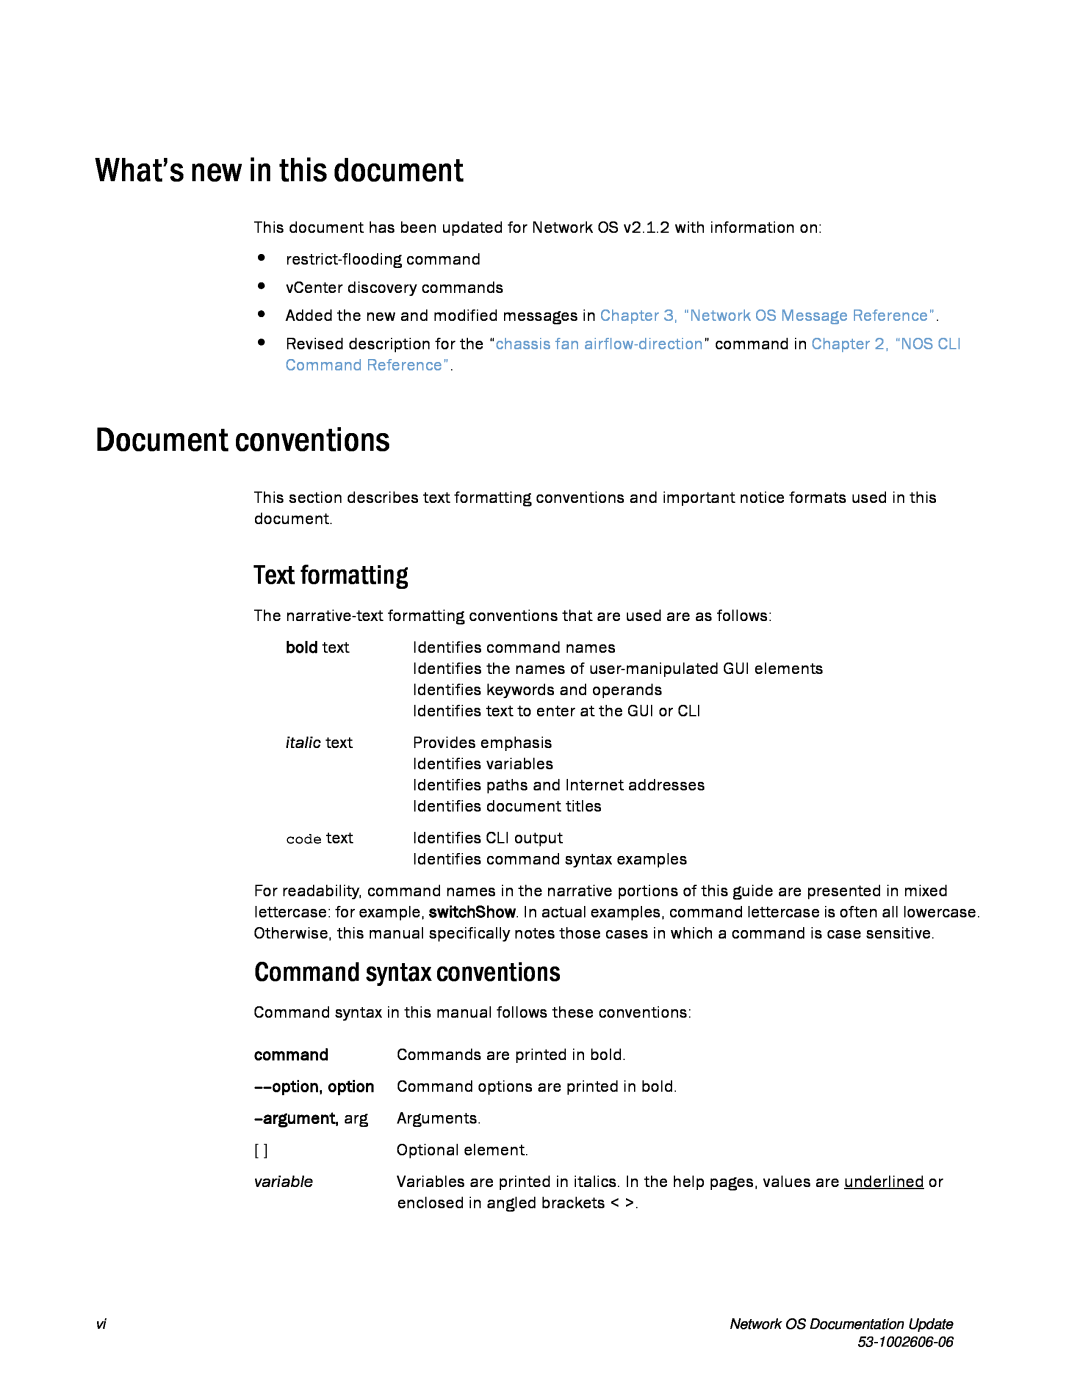 Brocade Communications Systems 2.1 manual What’s new in this document, Document conventions, Text formatting, italic text 